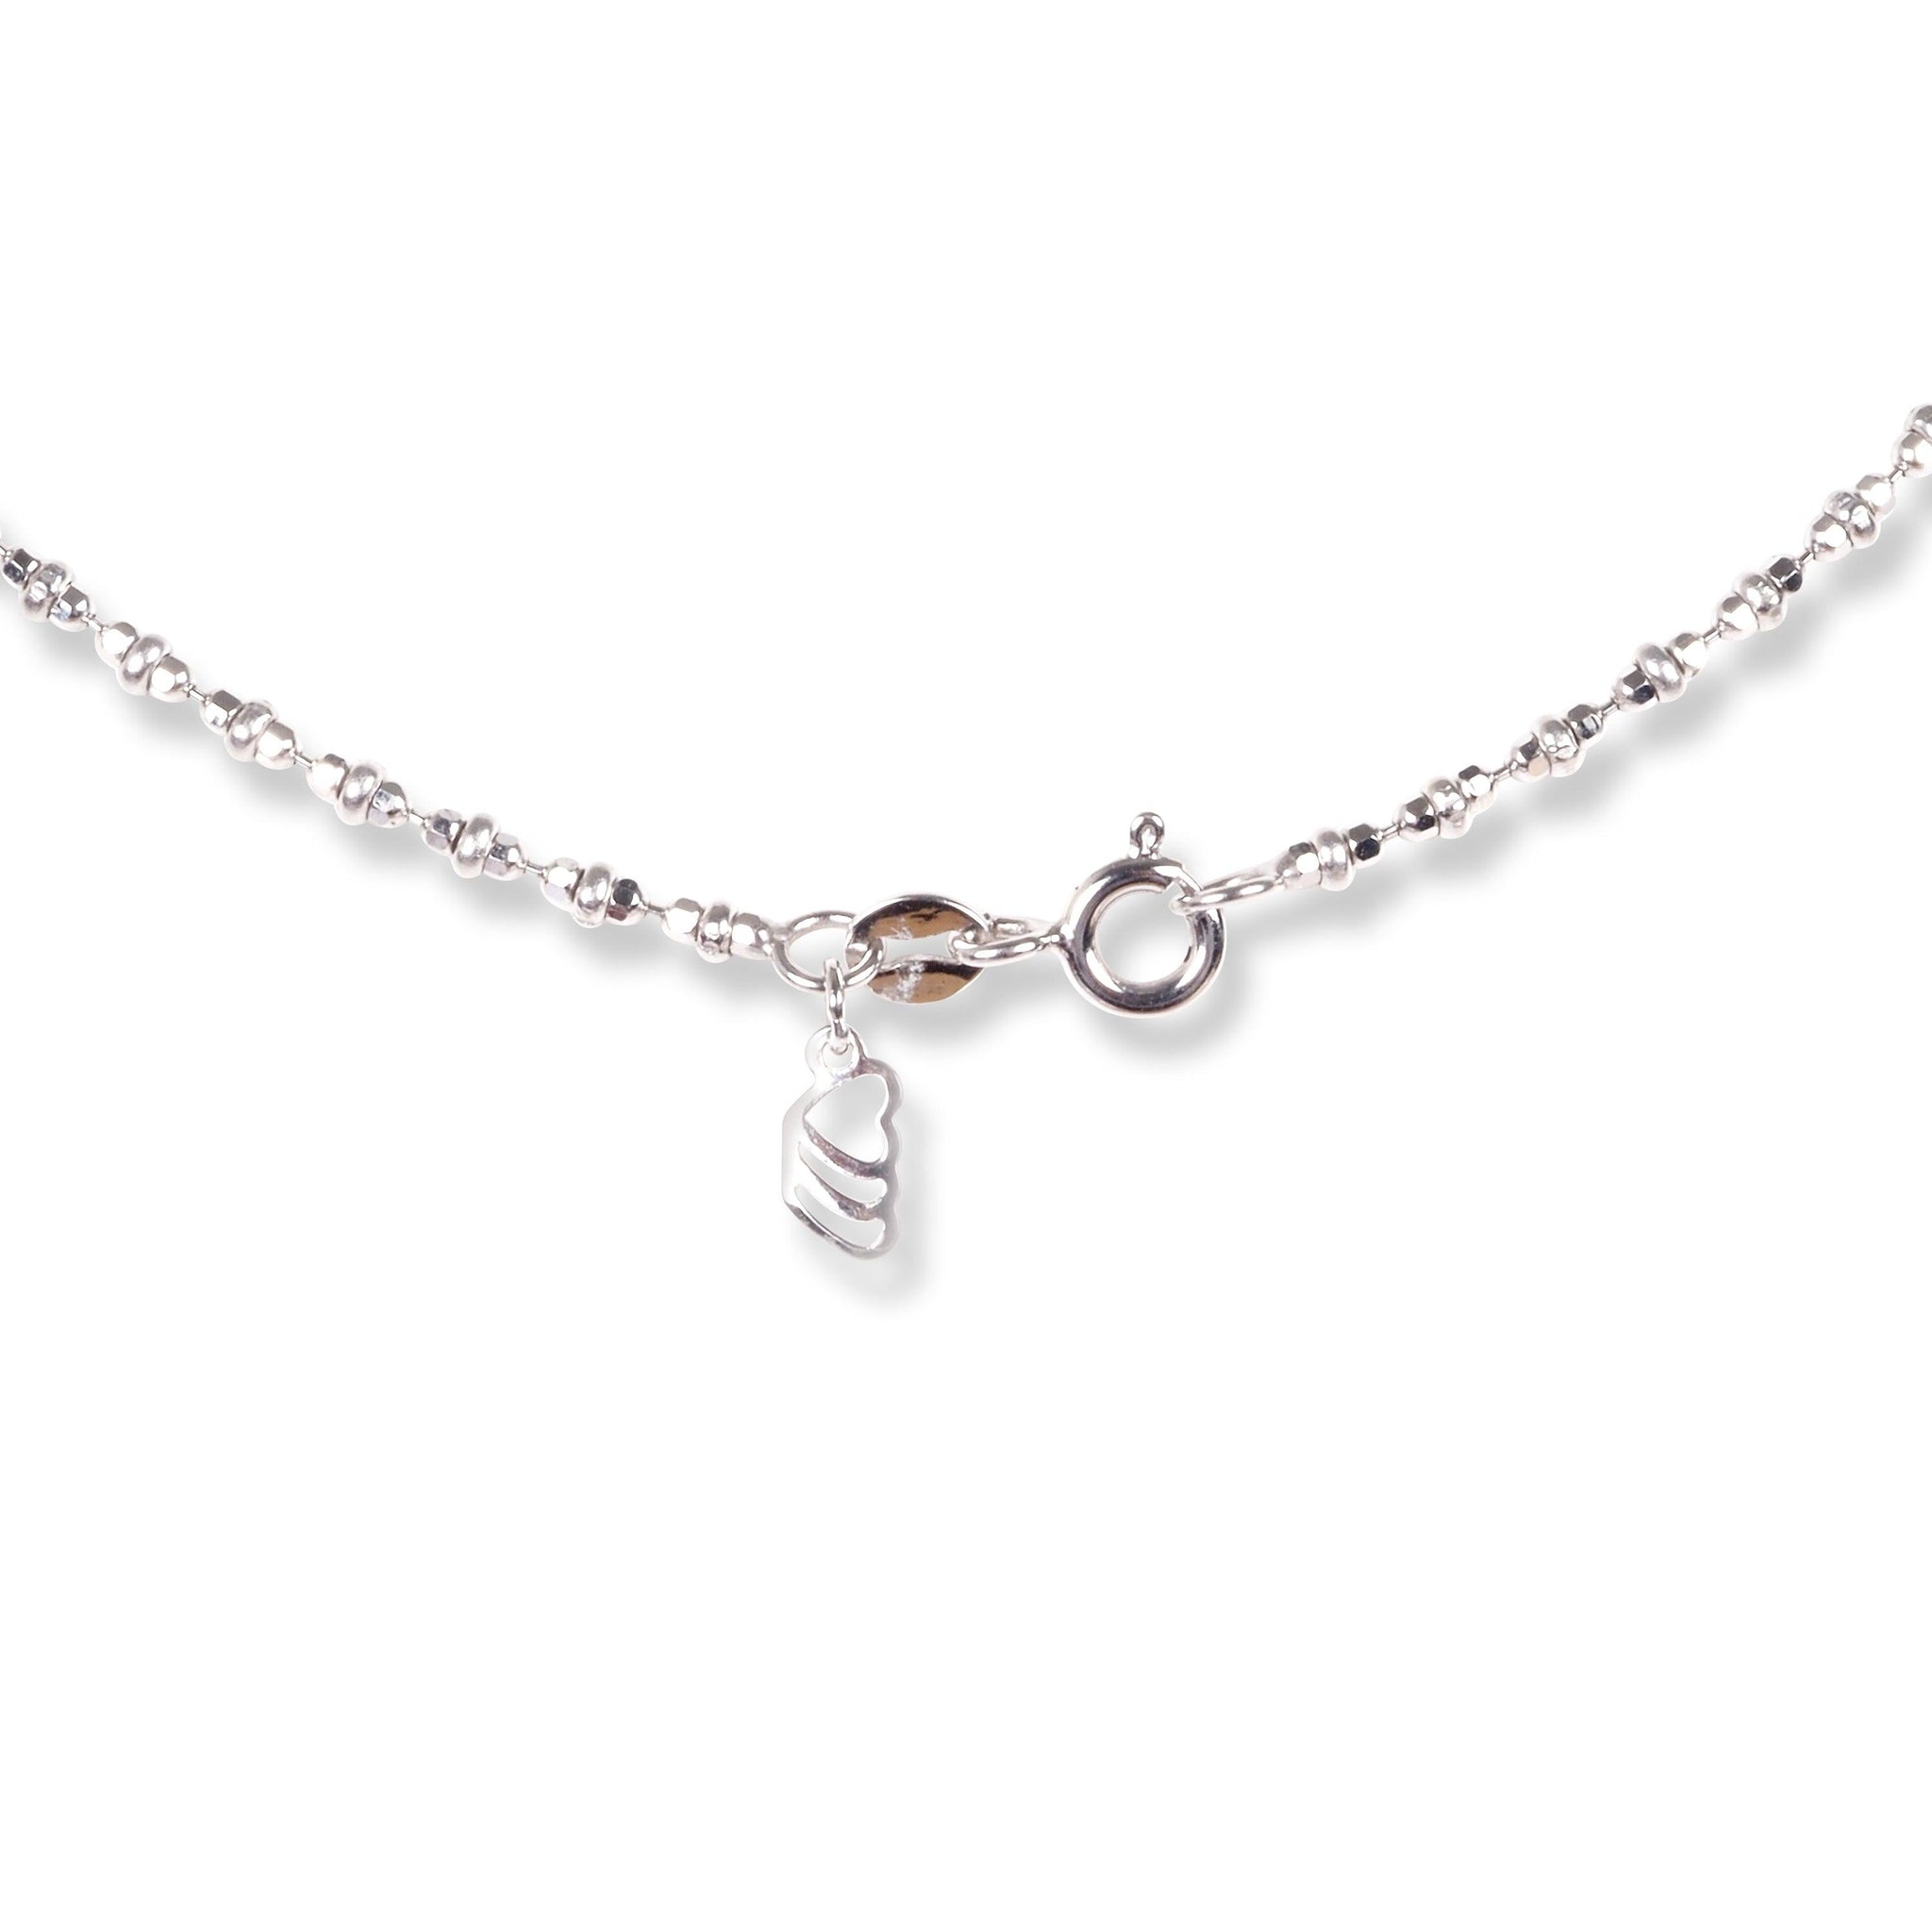 18ct White Gold Set with Cultured Pearl & Cubic Zirconia Stones (Pendant + Chain + Stud Earrings)